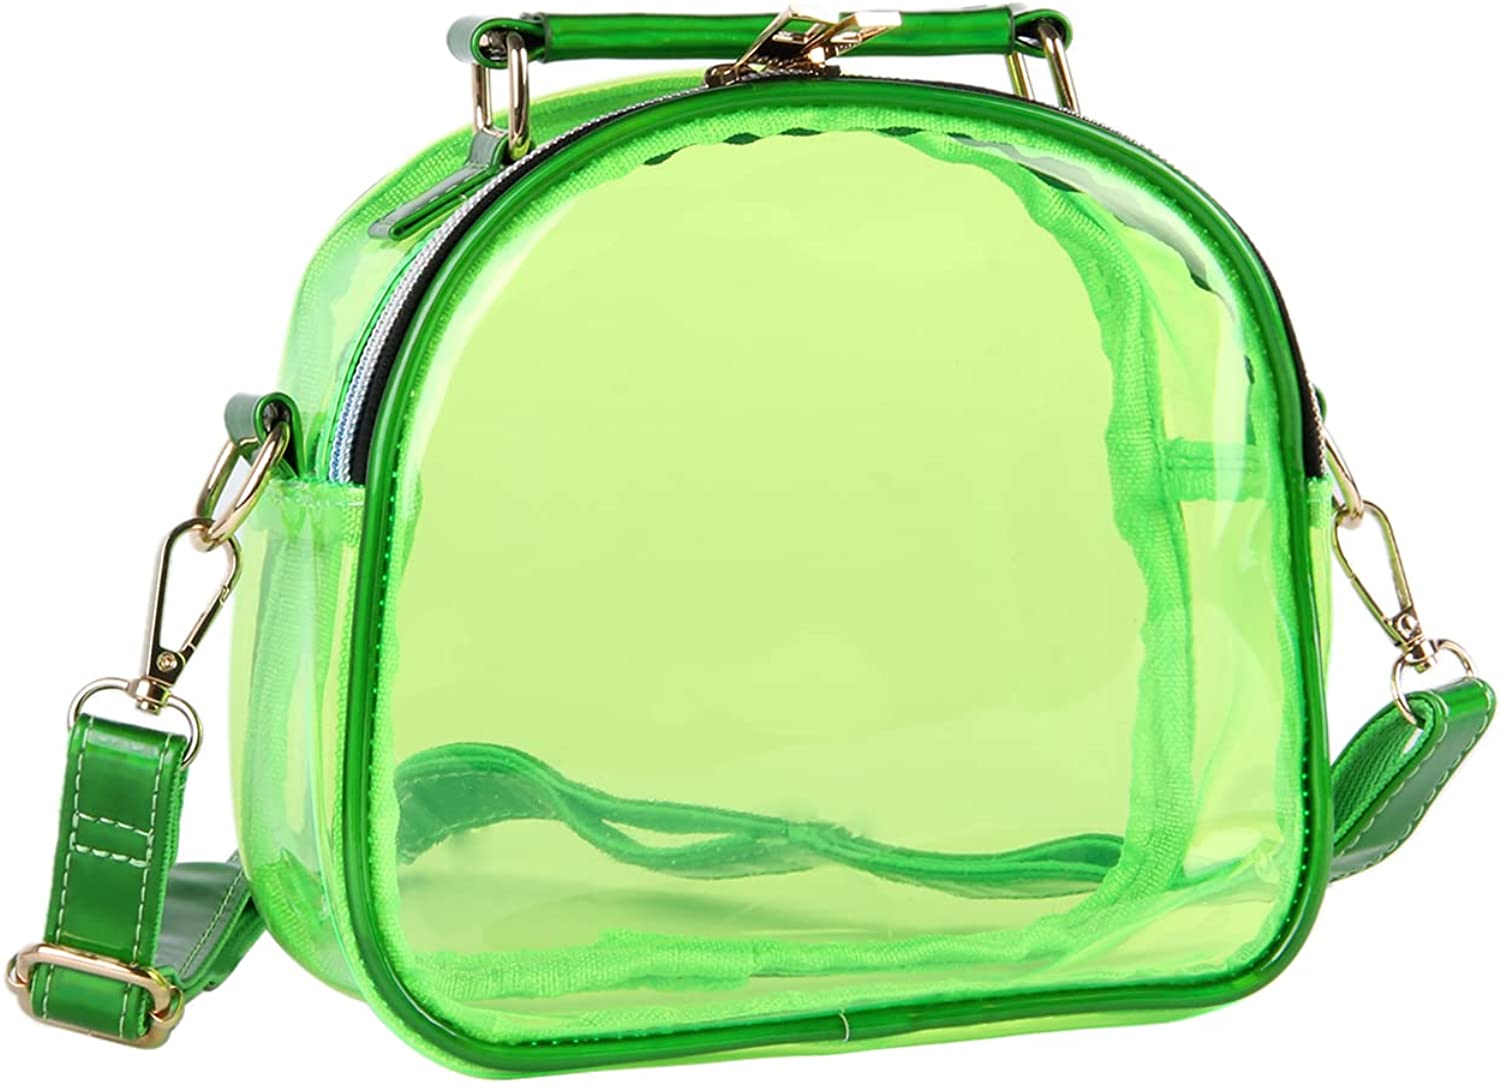 BRIMISKY Semi Transparent Jelly Bag for Women,Lady Fashion Lovely Bag,Clear Bag Stadium Approved